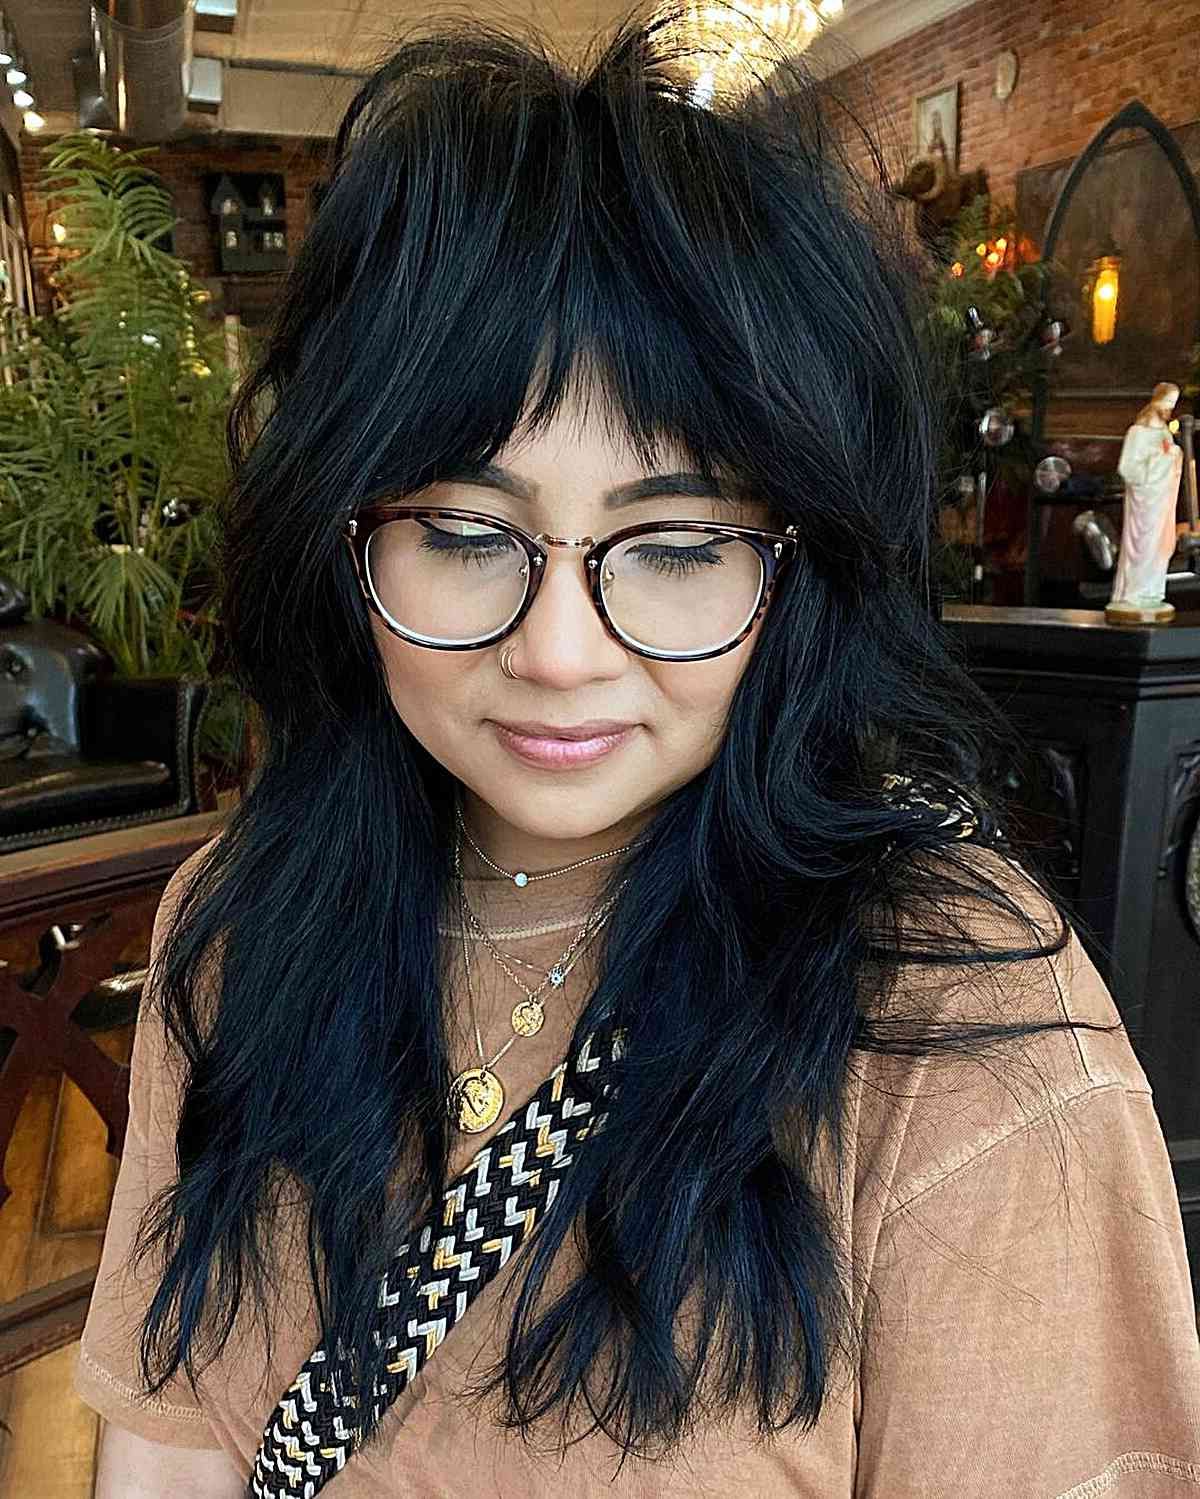 57 Coolest Long Shags With Bangs For A Trendy, New Look For Newest Medium Shaggy Black Hair With Bangs (View 13 of 18)